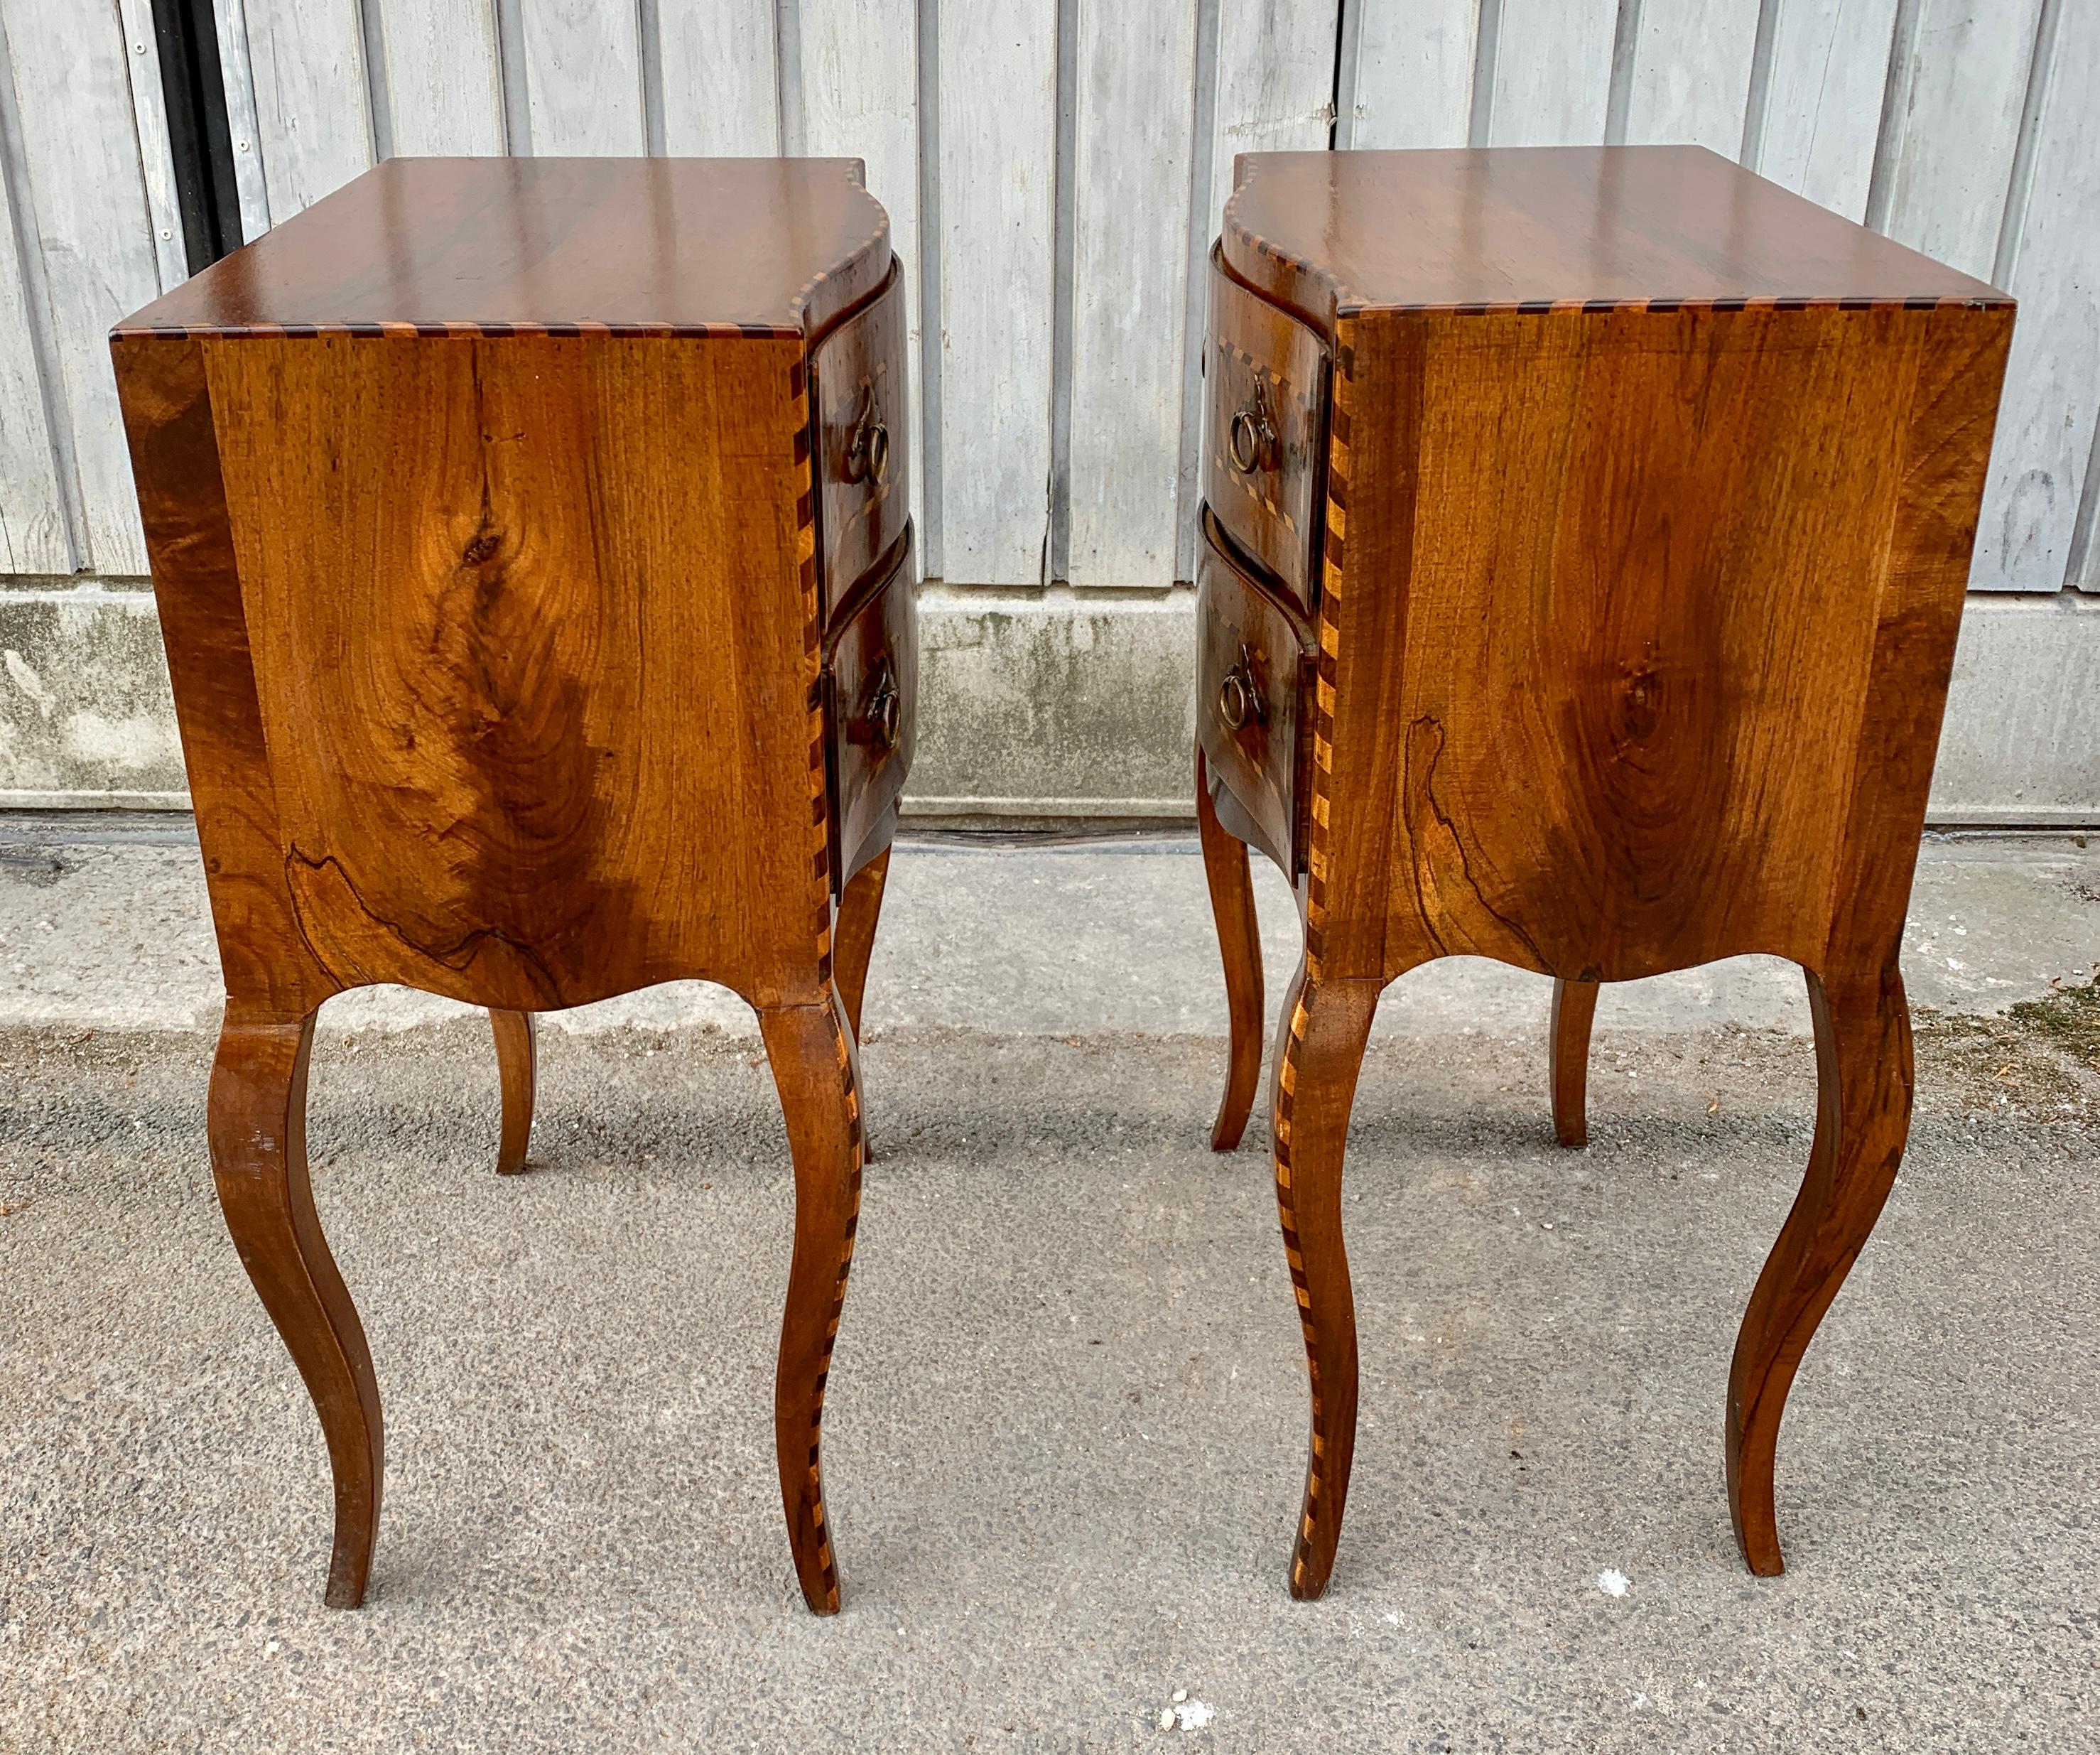 Early 20th Century Pair of Italian Antique Nightstands in Walnut and Brass Hardware